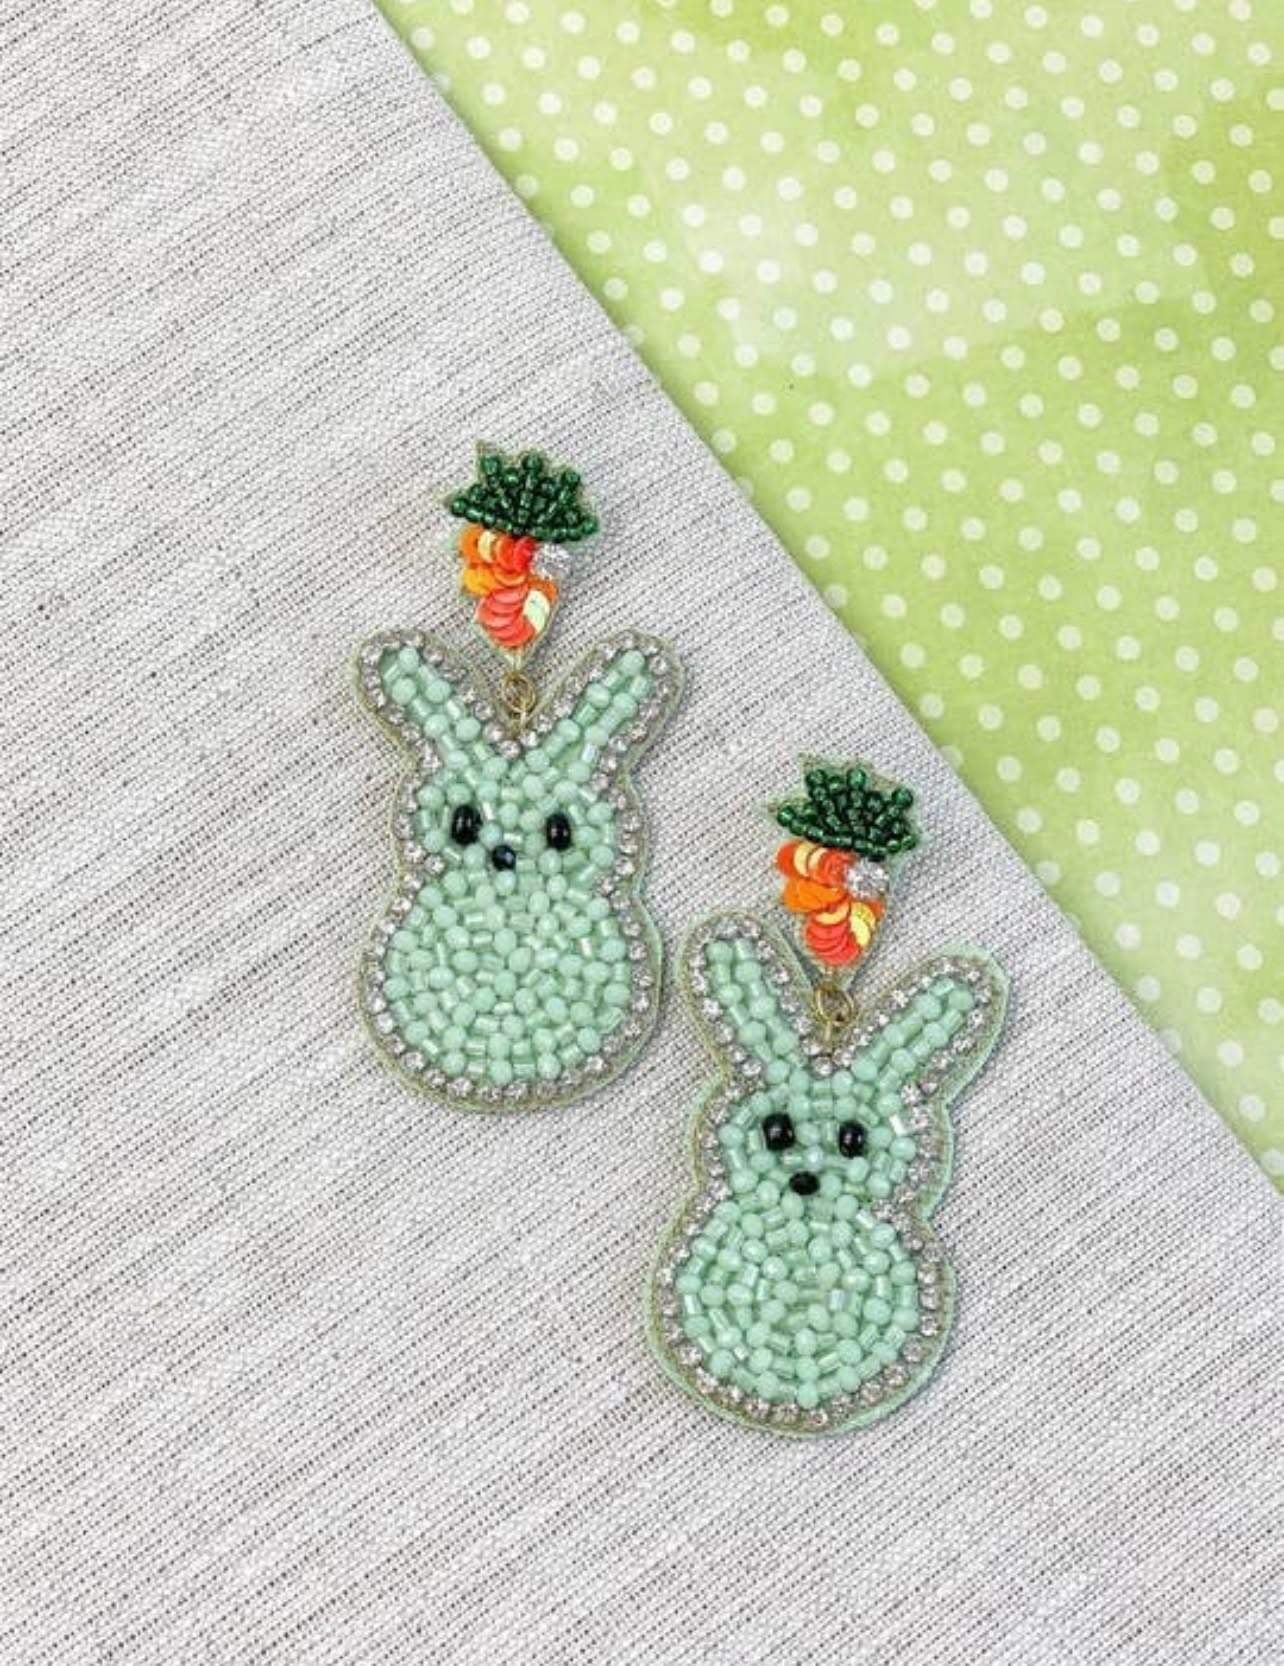 BUNNY BEADS MINT EARRINGS - Baby Bums Clothing 